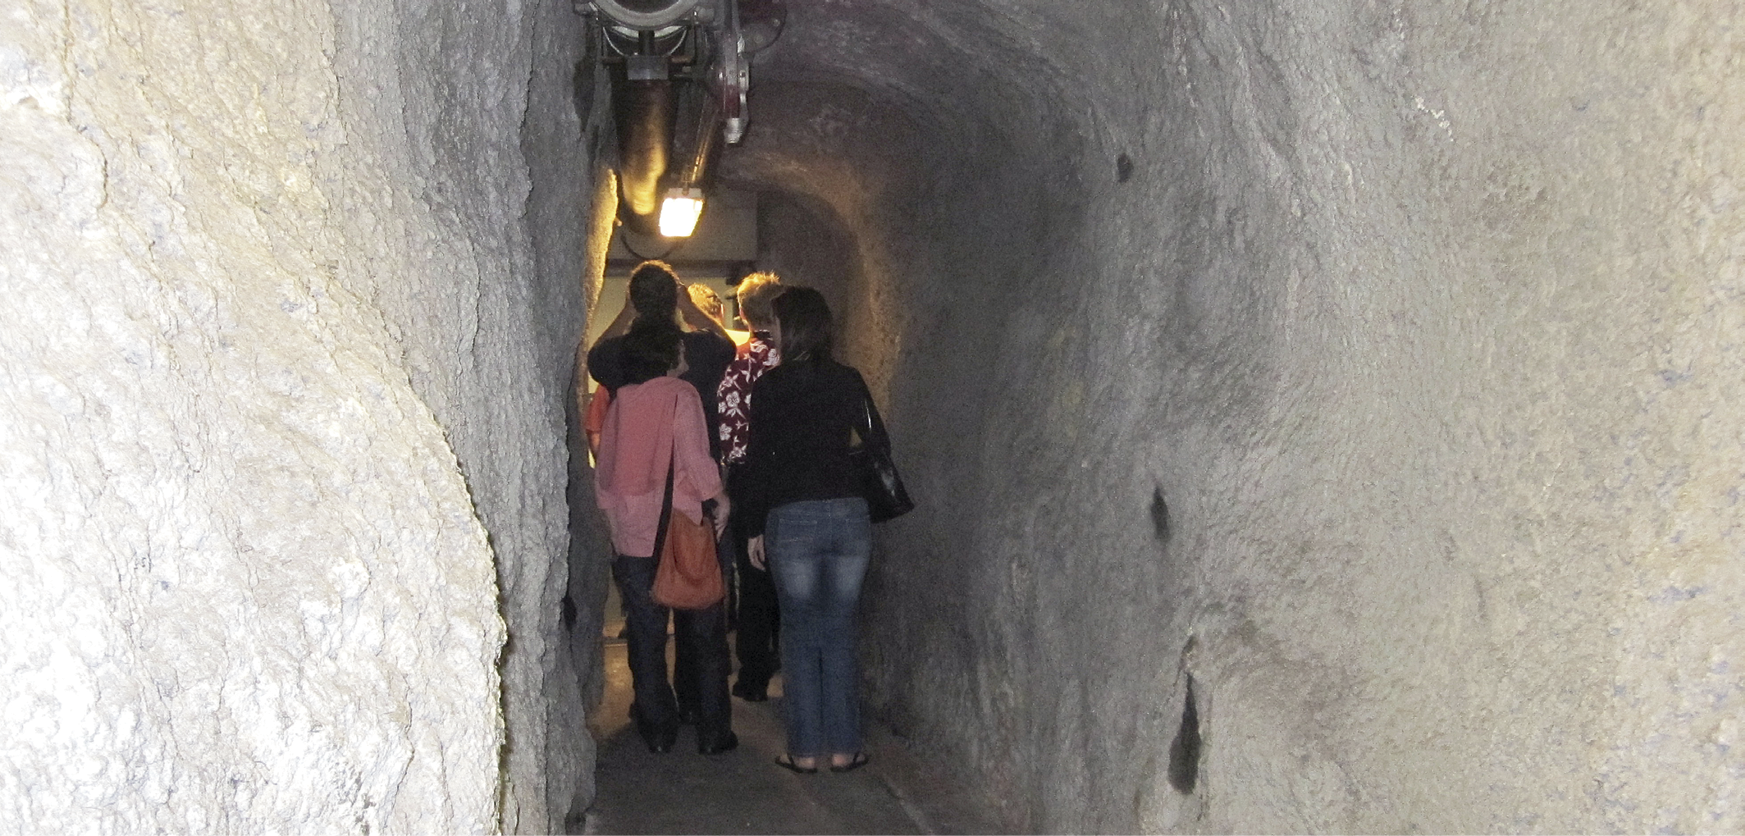 Photo of the inside of an exit cross-carriageway tunnel. The walls are roughly-hewn stone and there is a light overhead. Several adults are walking through the tunnel.